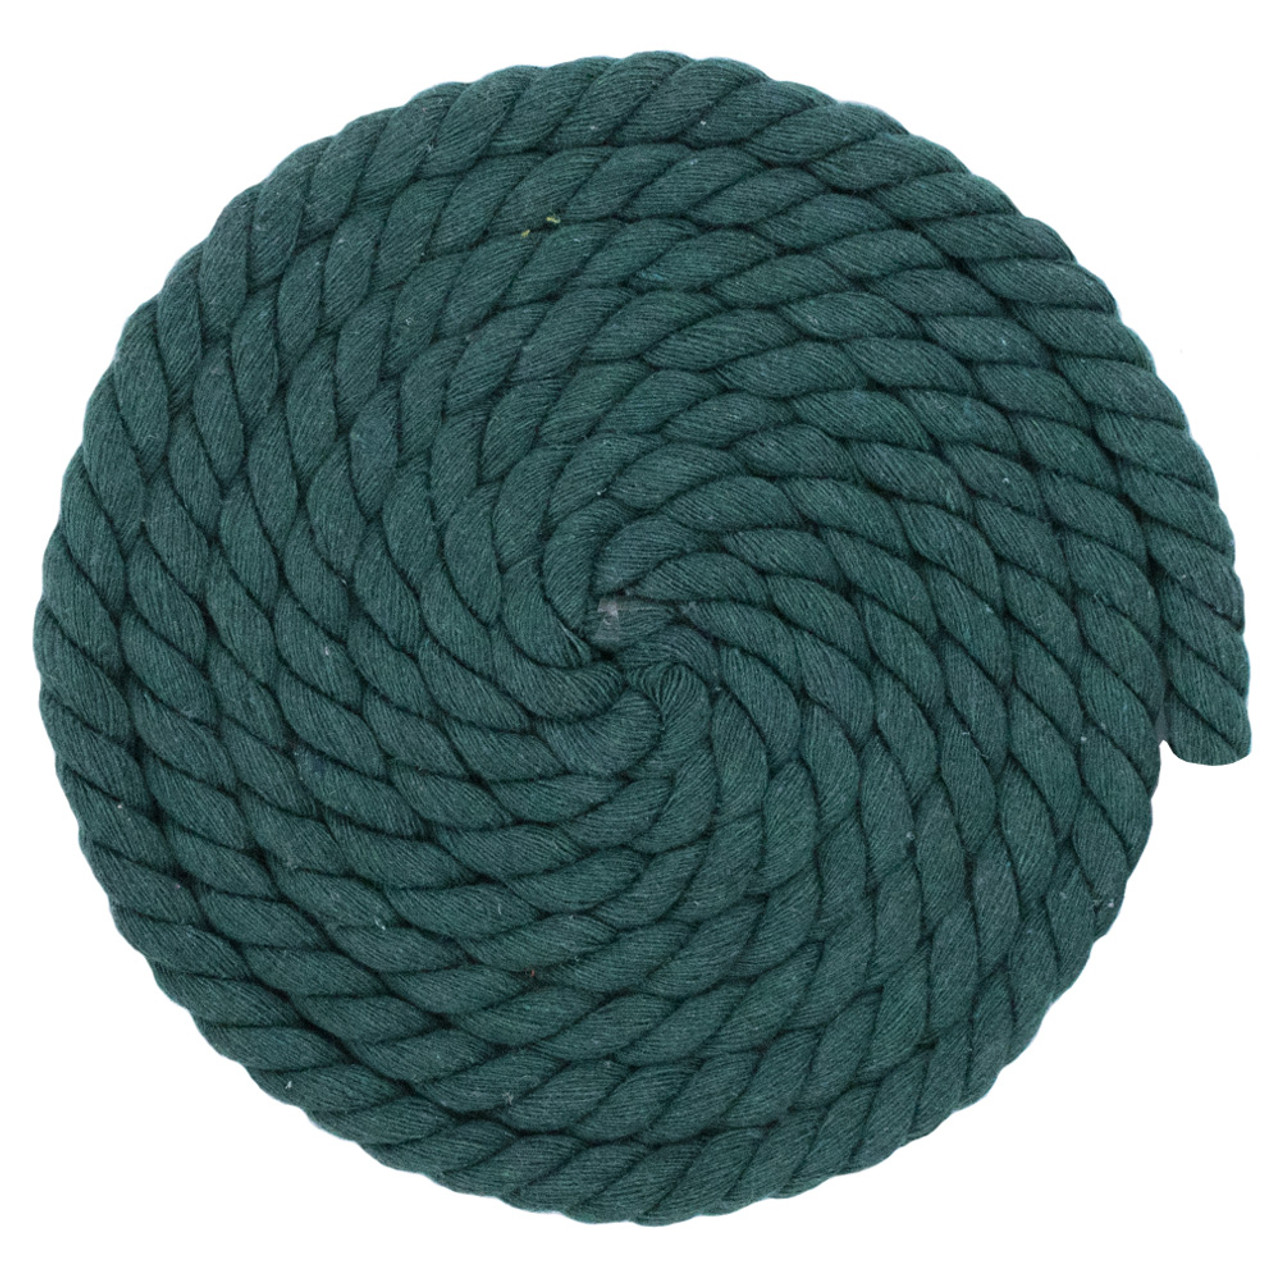 1/2 Inch Twisted Cotton Rope - Dark Green